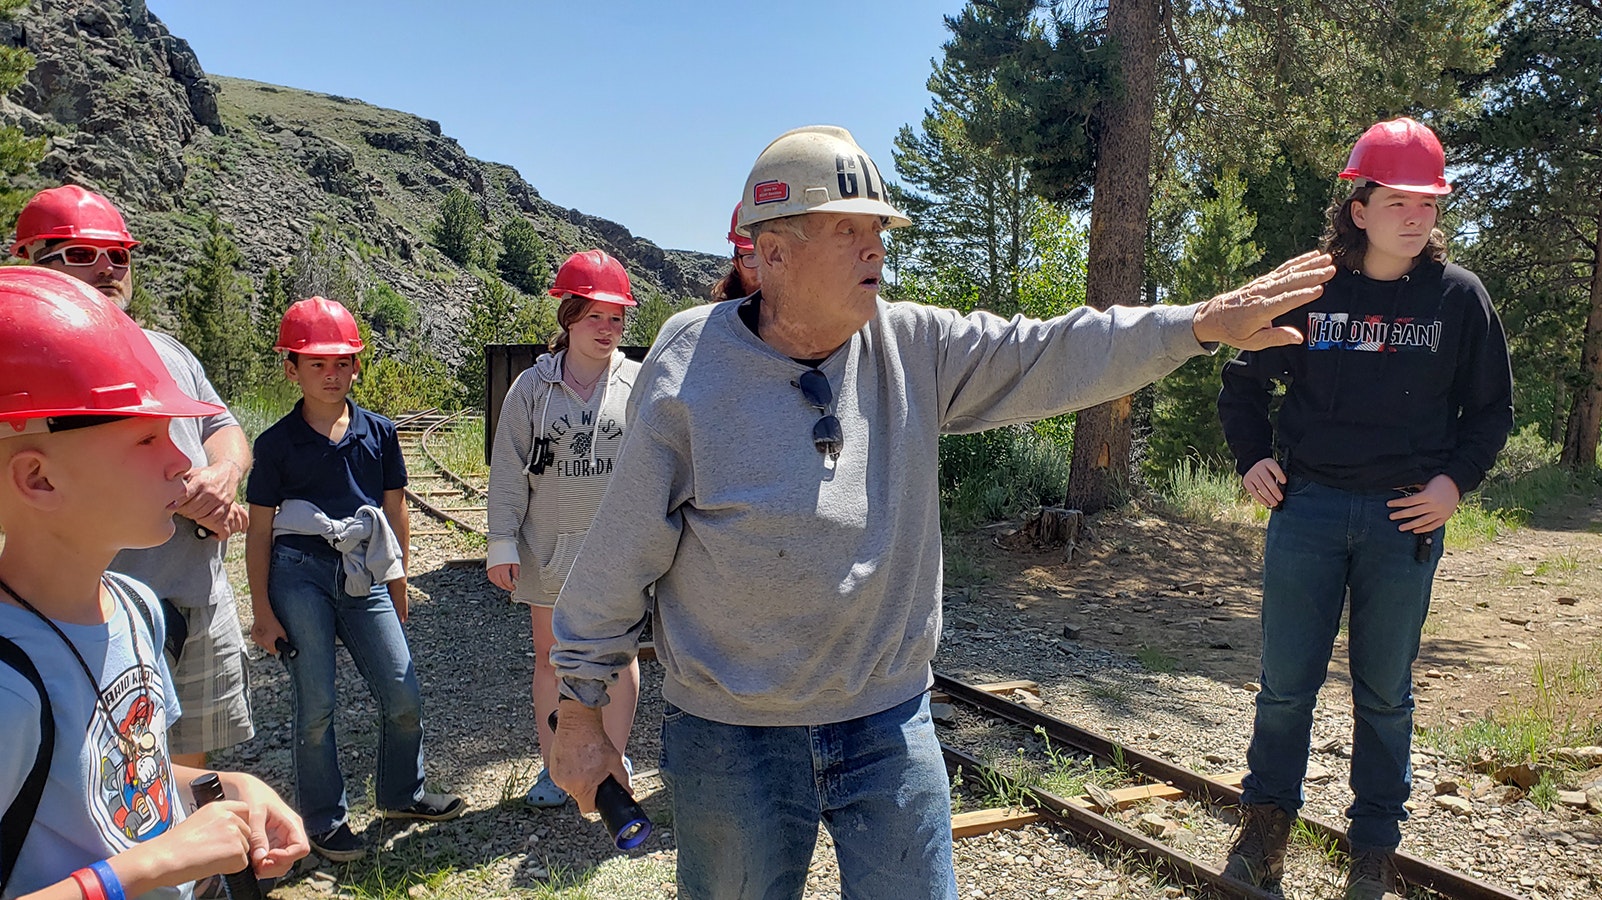 Glen Hester tells a tour group the story of how the English Tunnel was discovered at South Pass City just before heading into the tunnel itself.